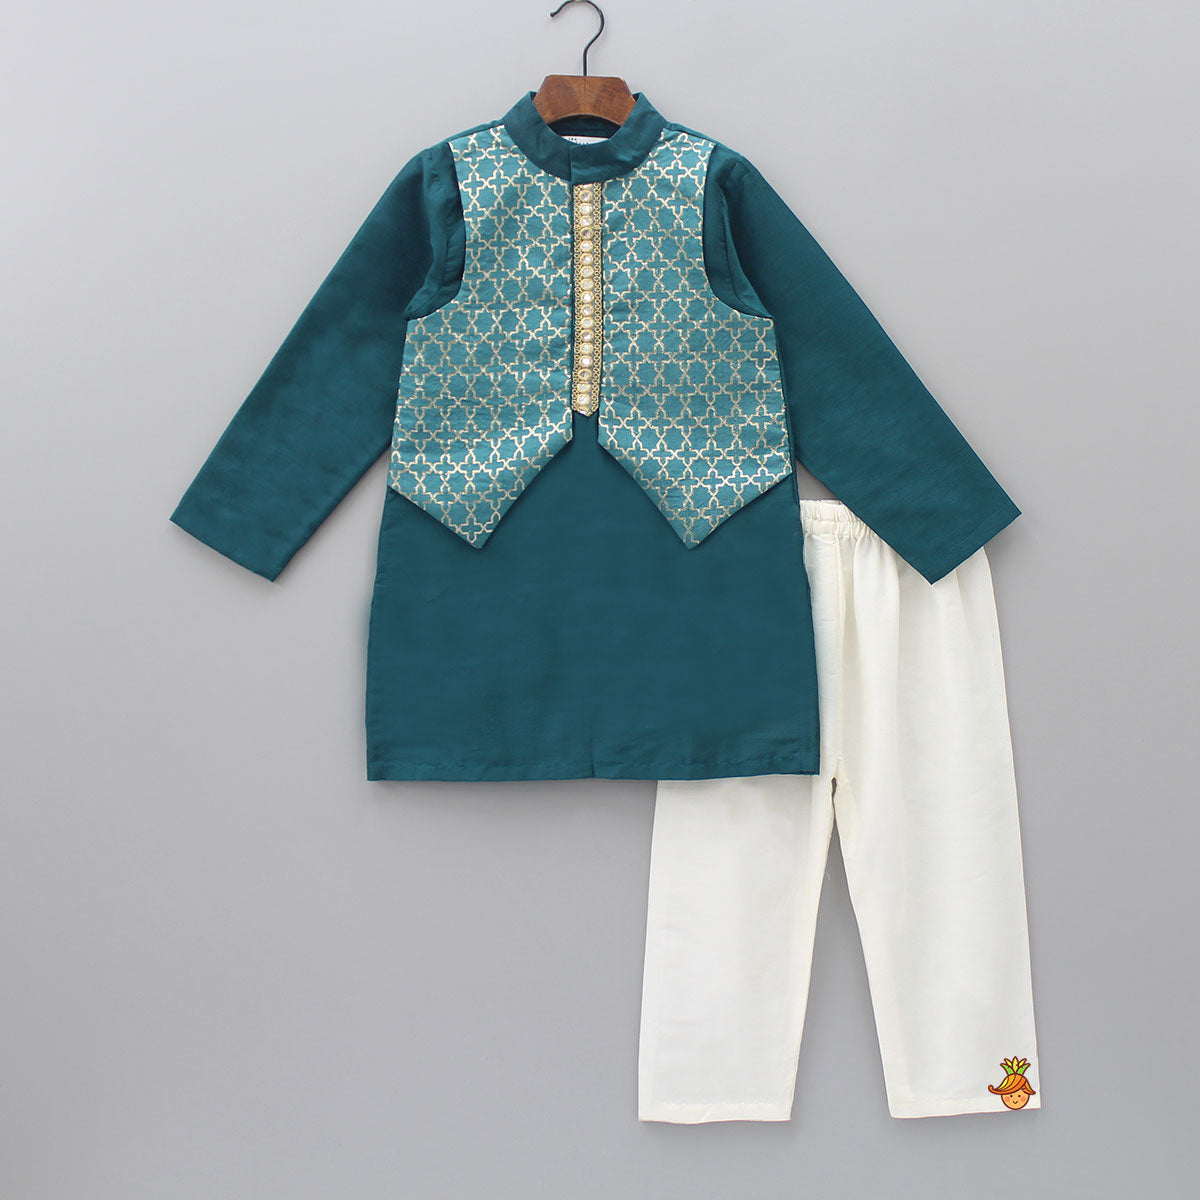 Bottle Green Kurta With Attached Jacket And Pyjama